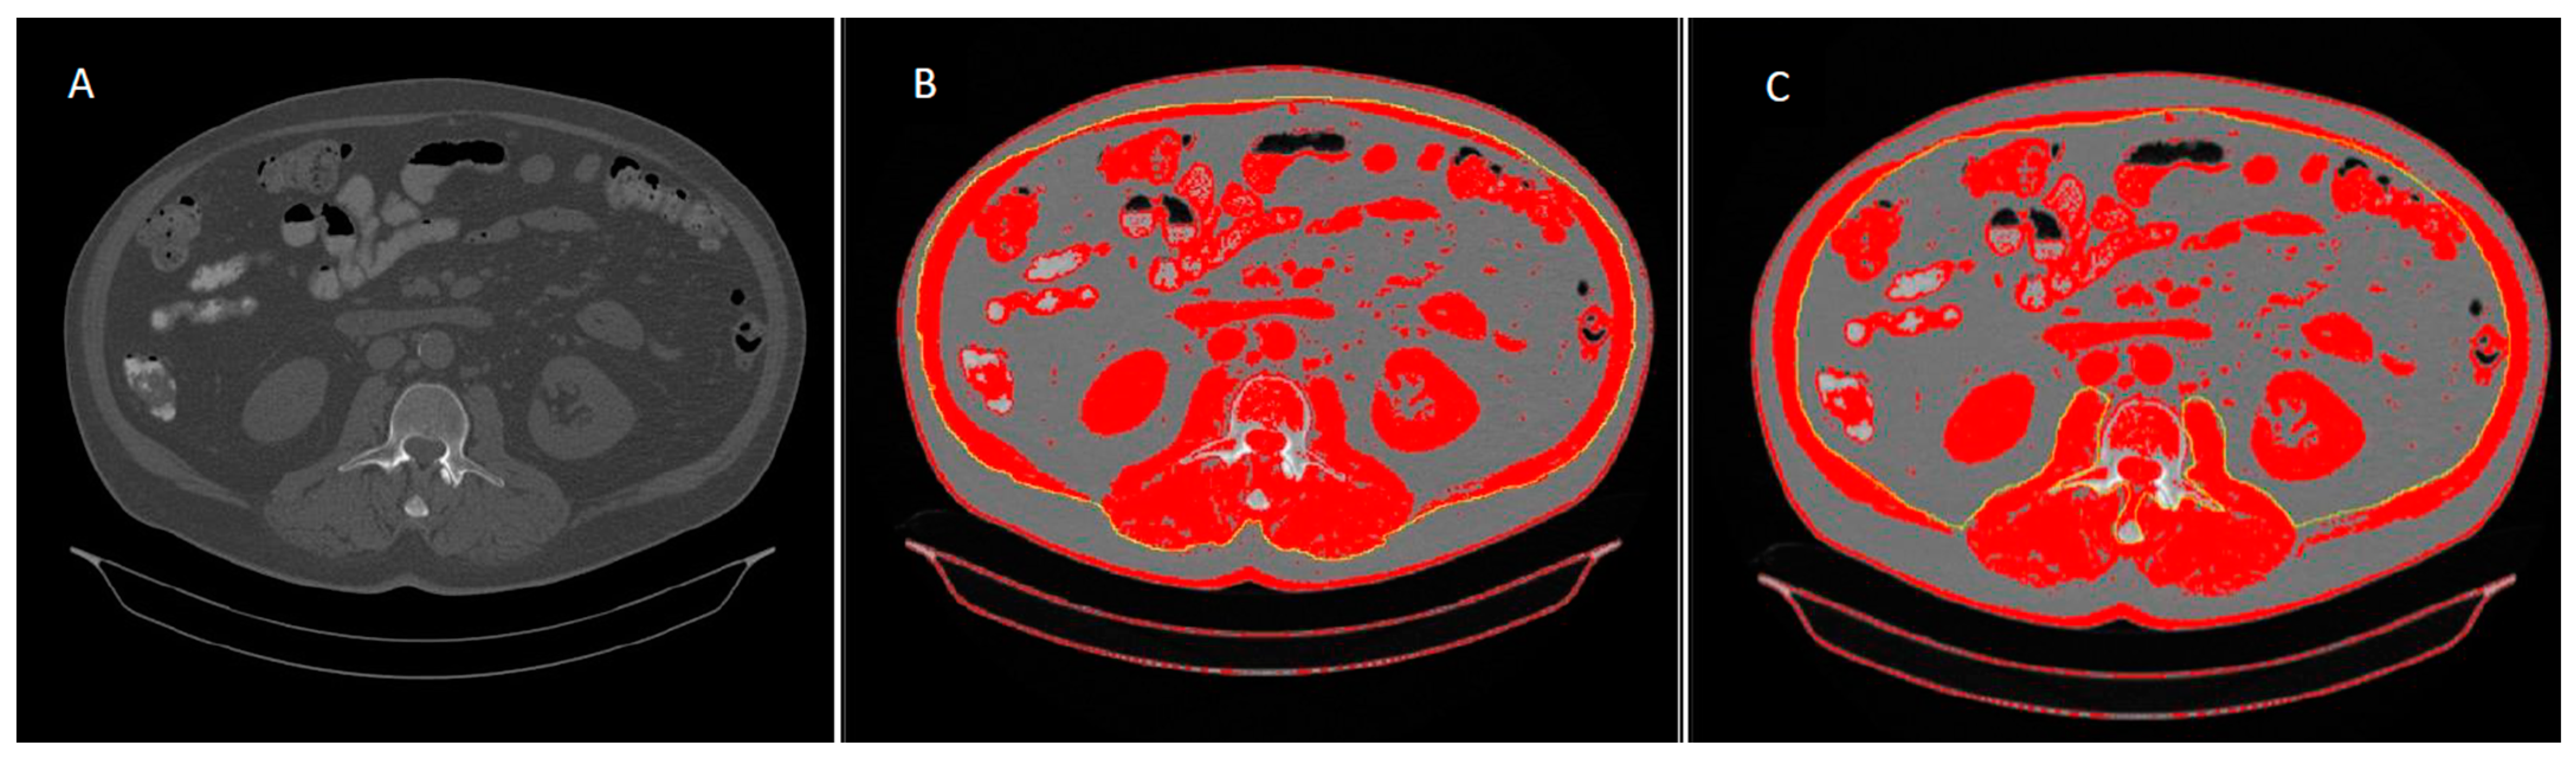 Nutrients | Free Full-Text | Detection of Sarcopenia in Patients with Liver  Cirrhosis Using the Bioelectrical Impedance Analysis